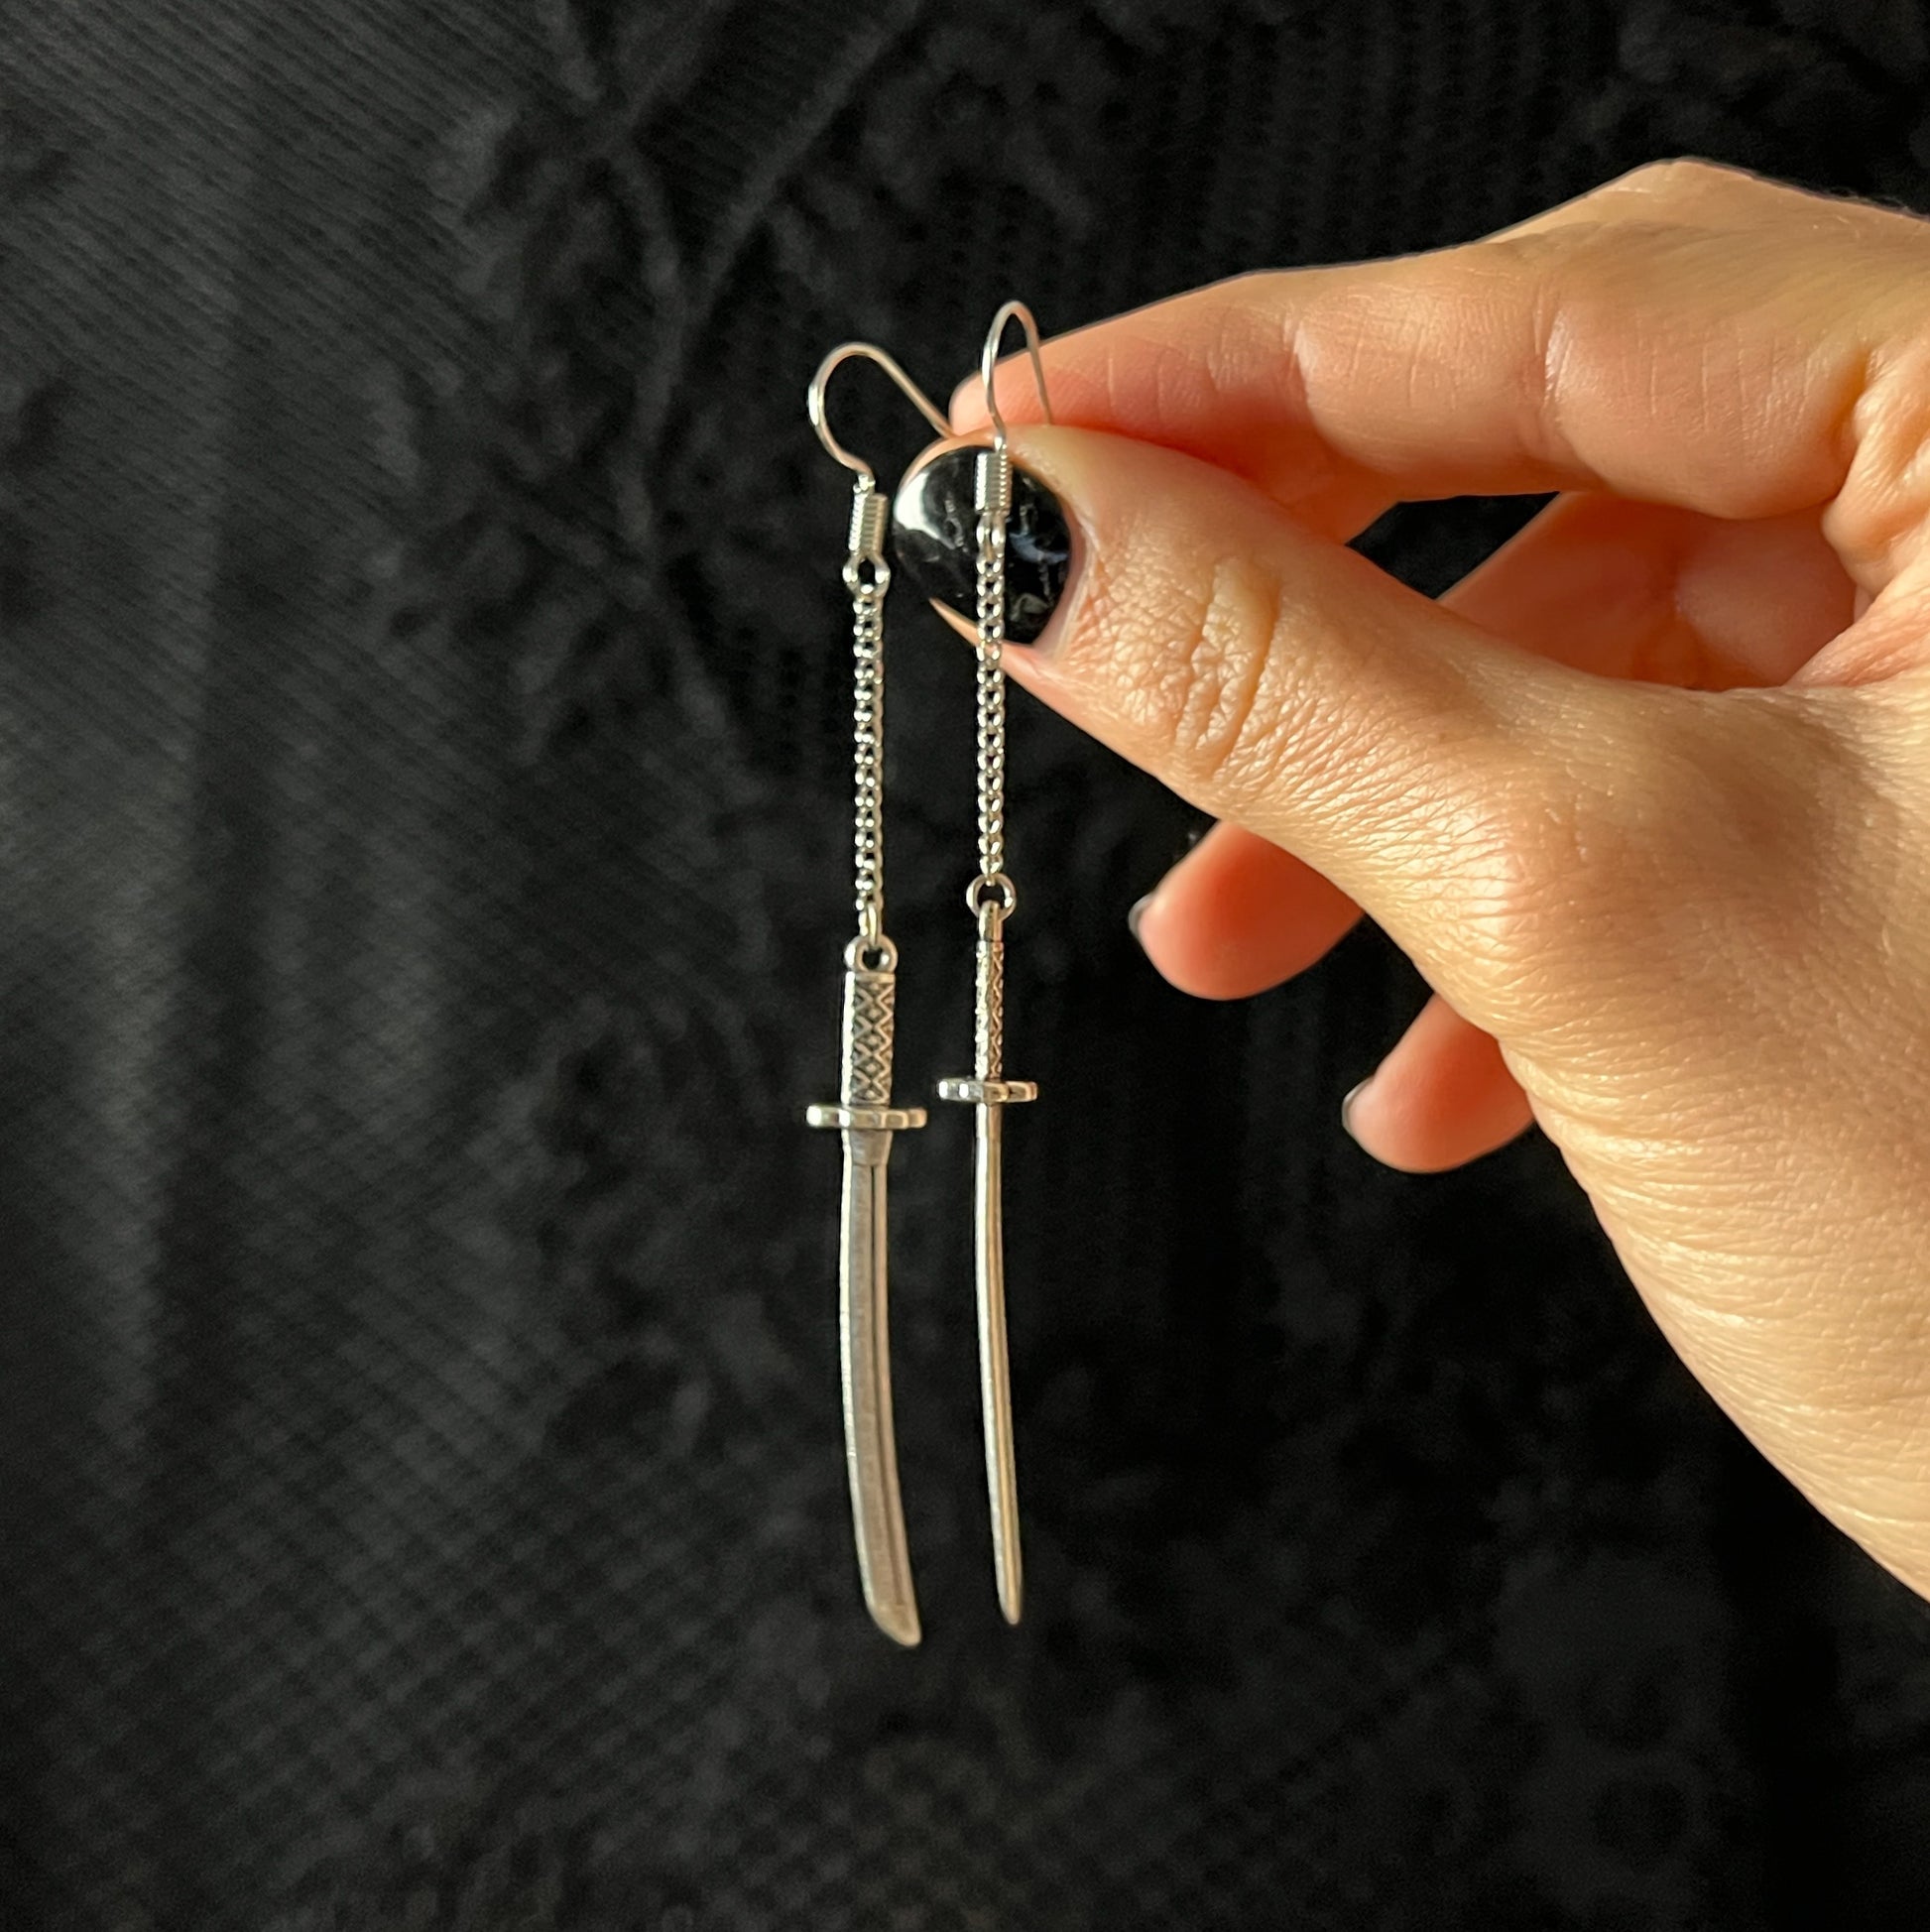 Katana earrings statement sword jewelry gothic witchy alternative earrings gothic gift